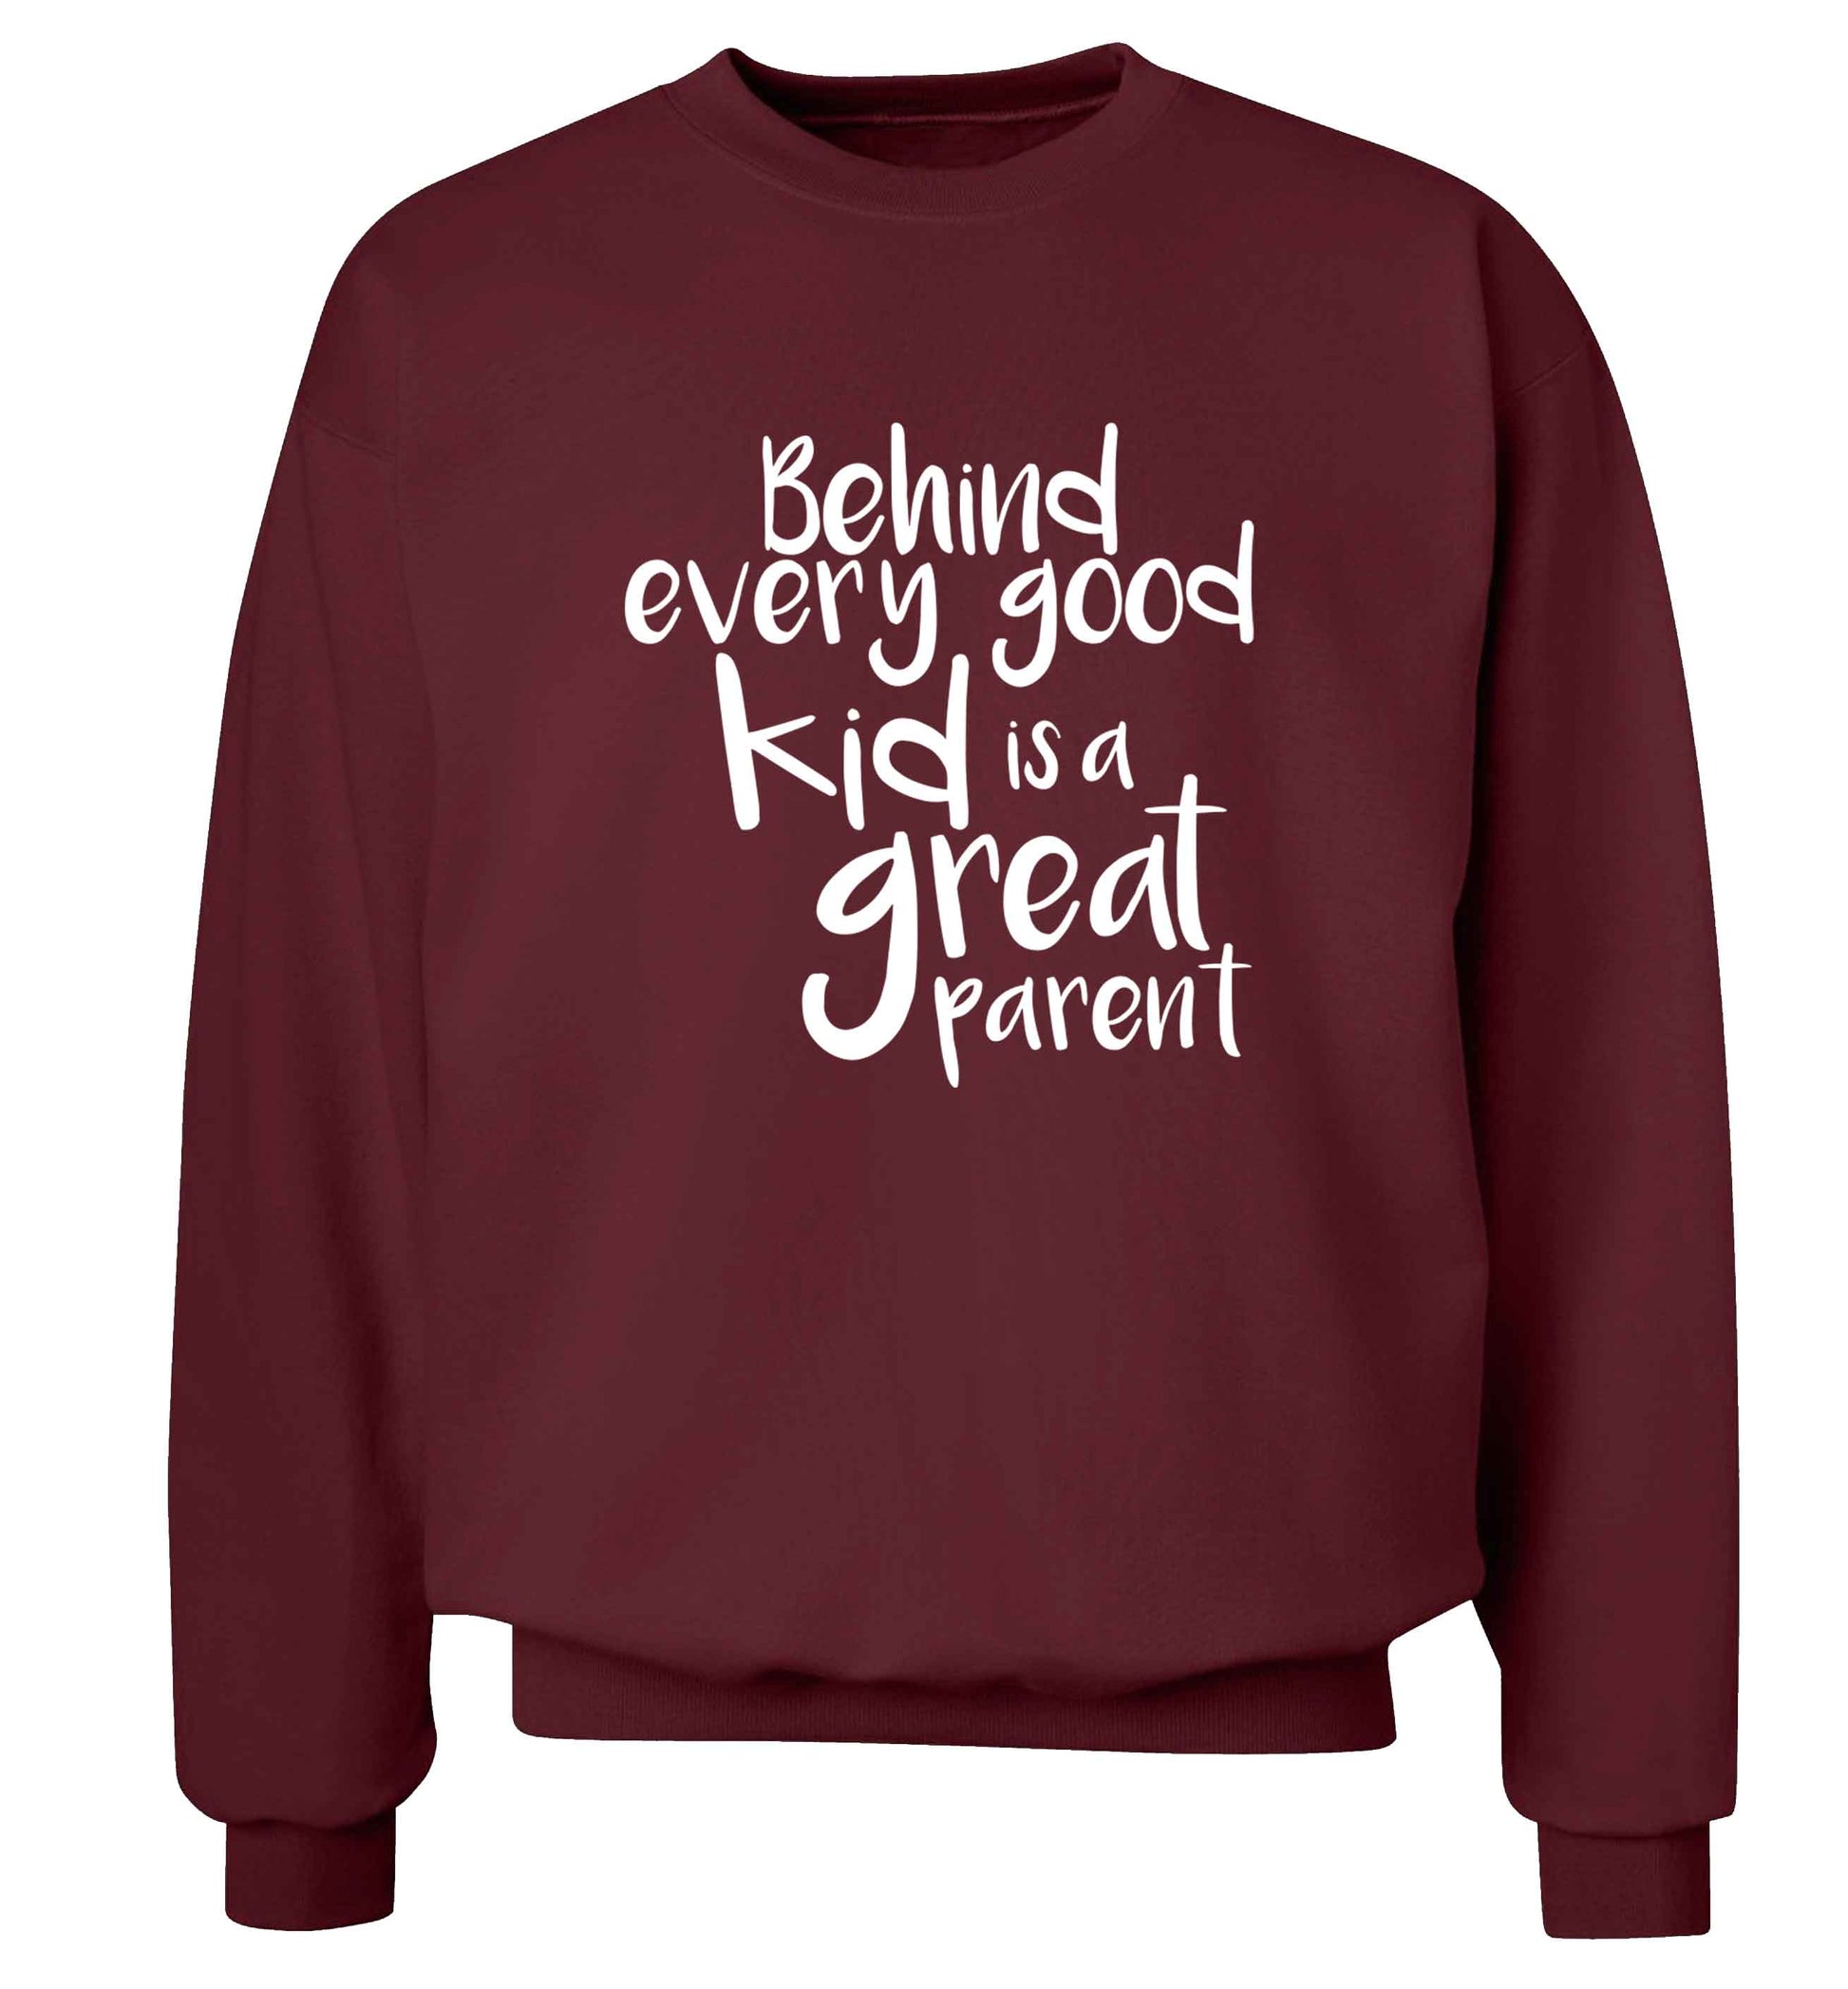 Behind every good kid is a great parent adult's unisex maroon sweater 2XL